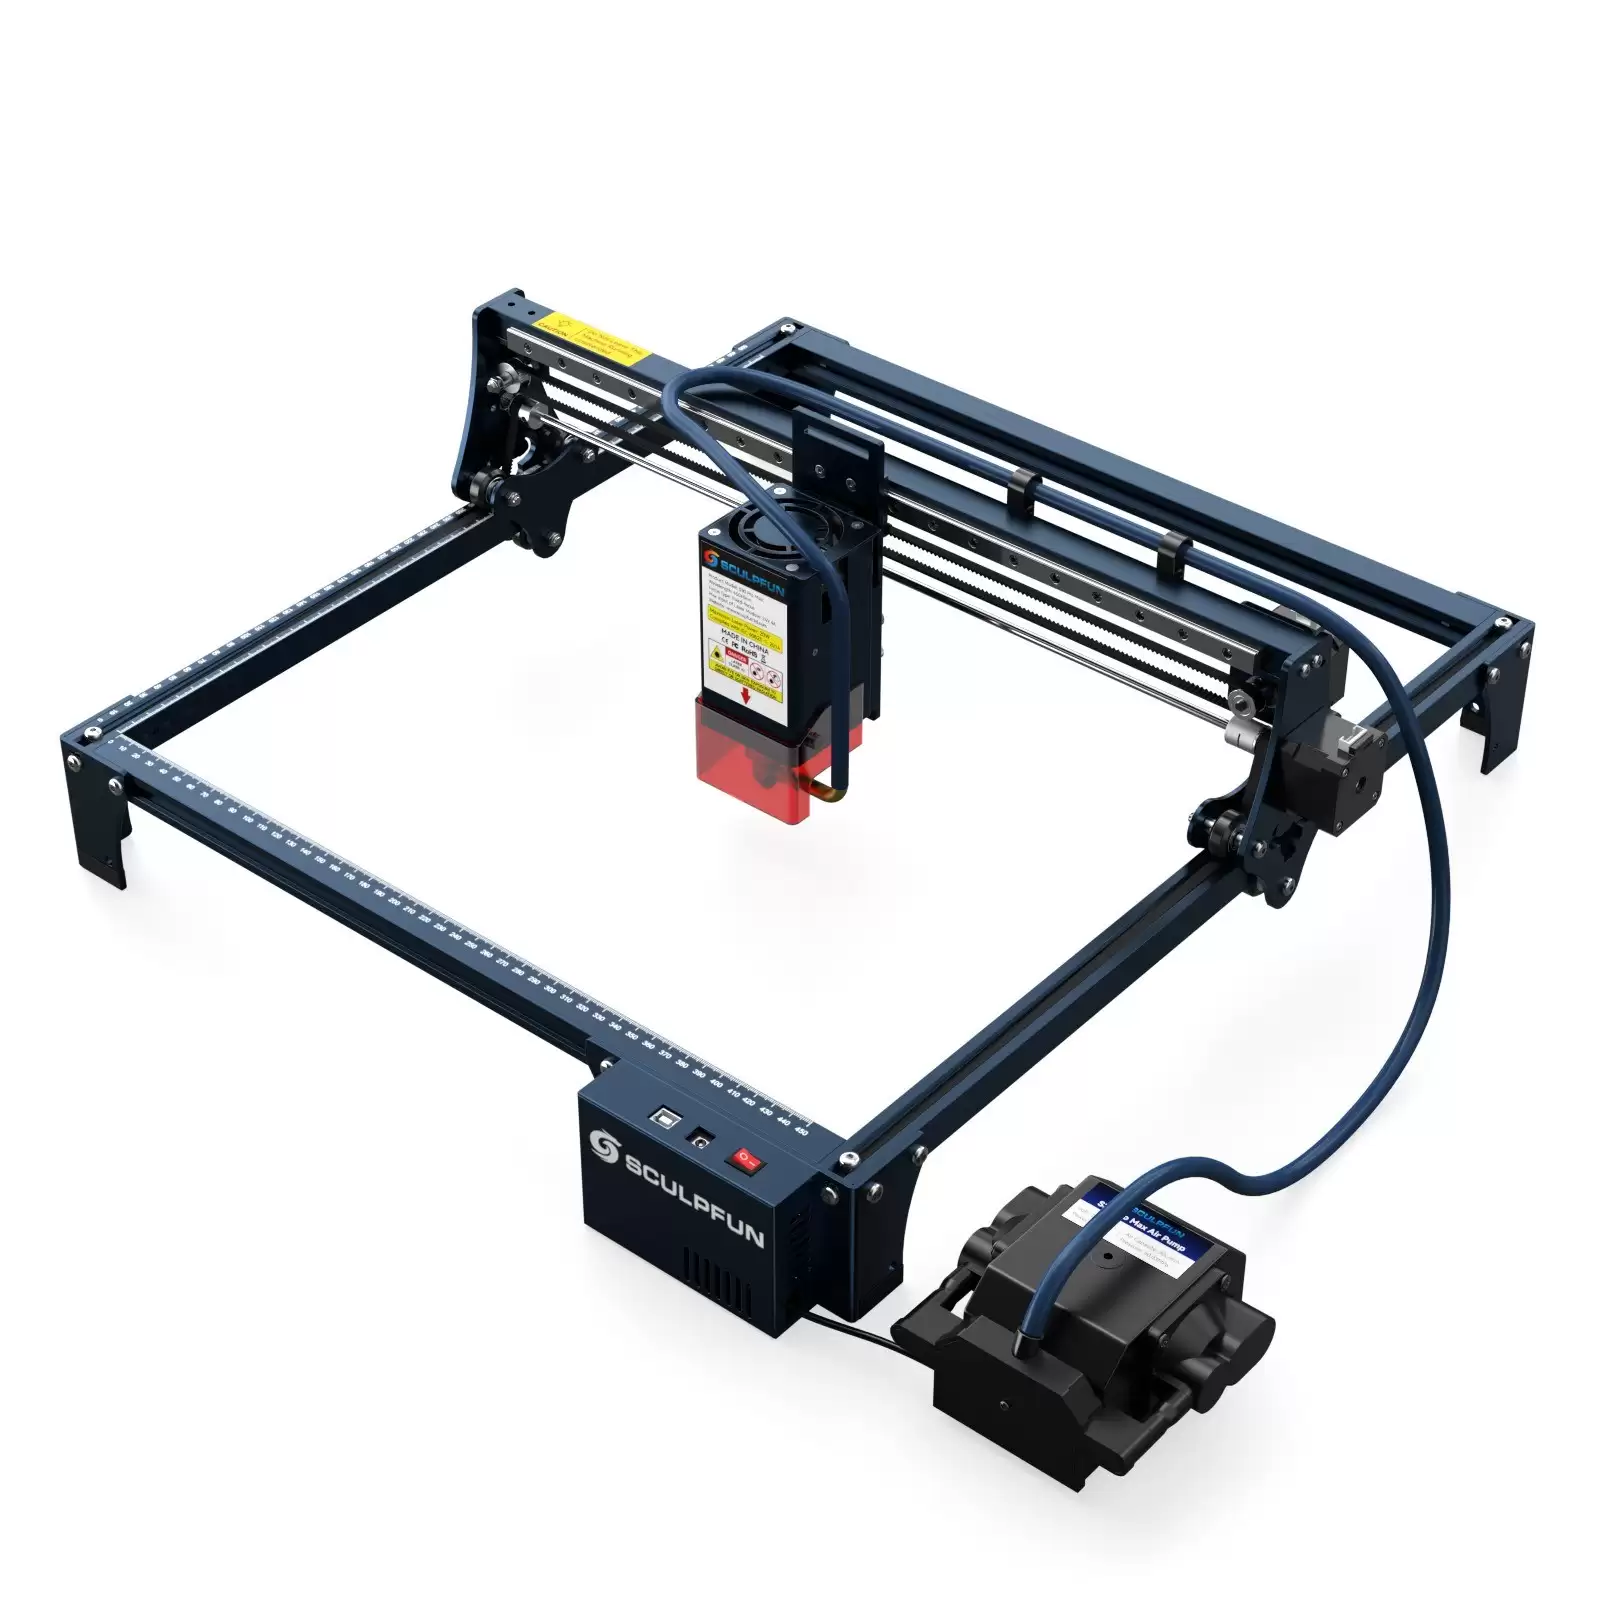 Order In Just €509 Sculpfun S30 Pro Max 20w Laser Engraver With This Discount Coupon At Cafago